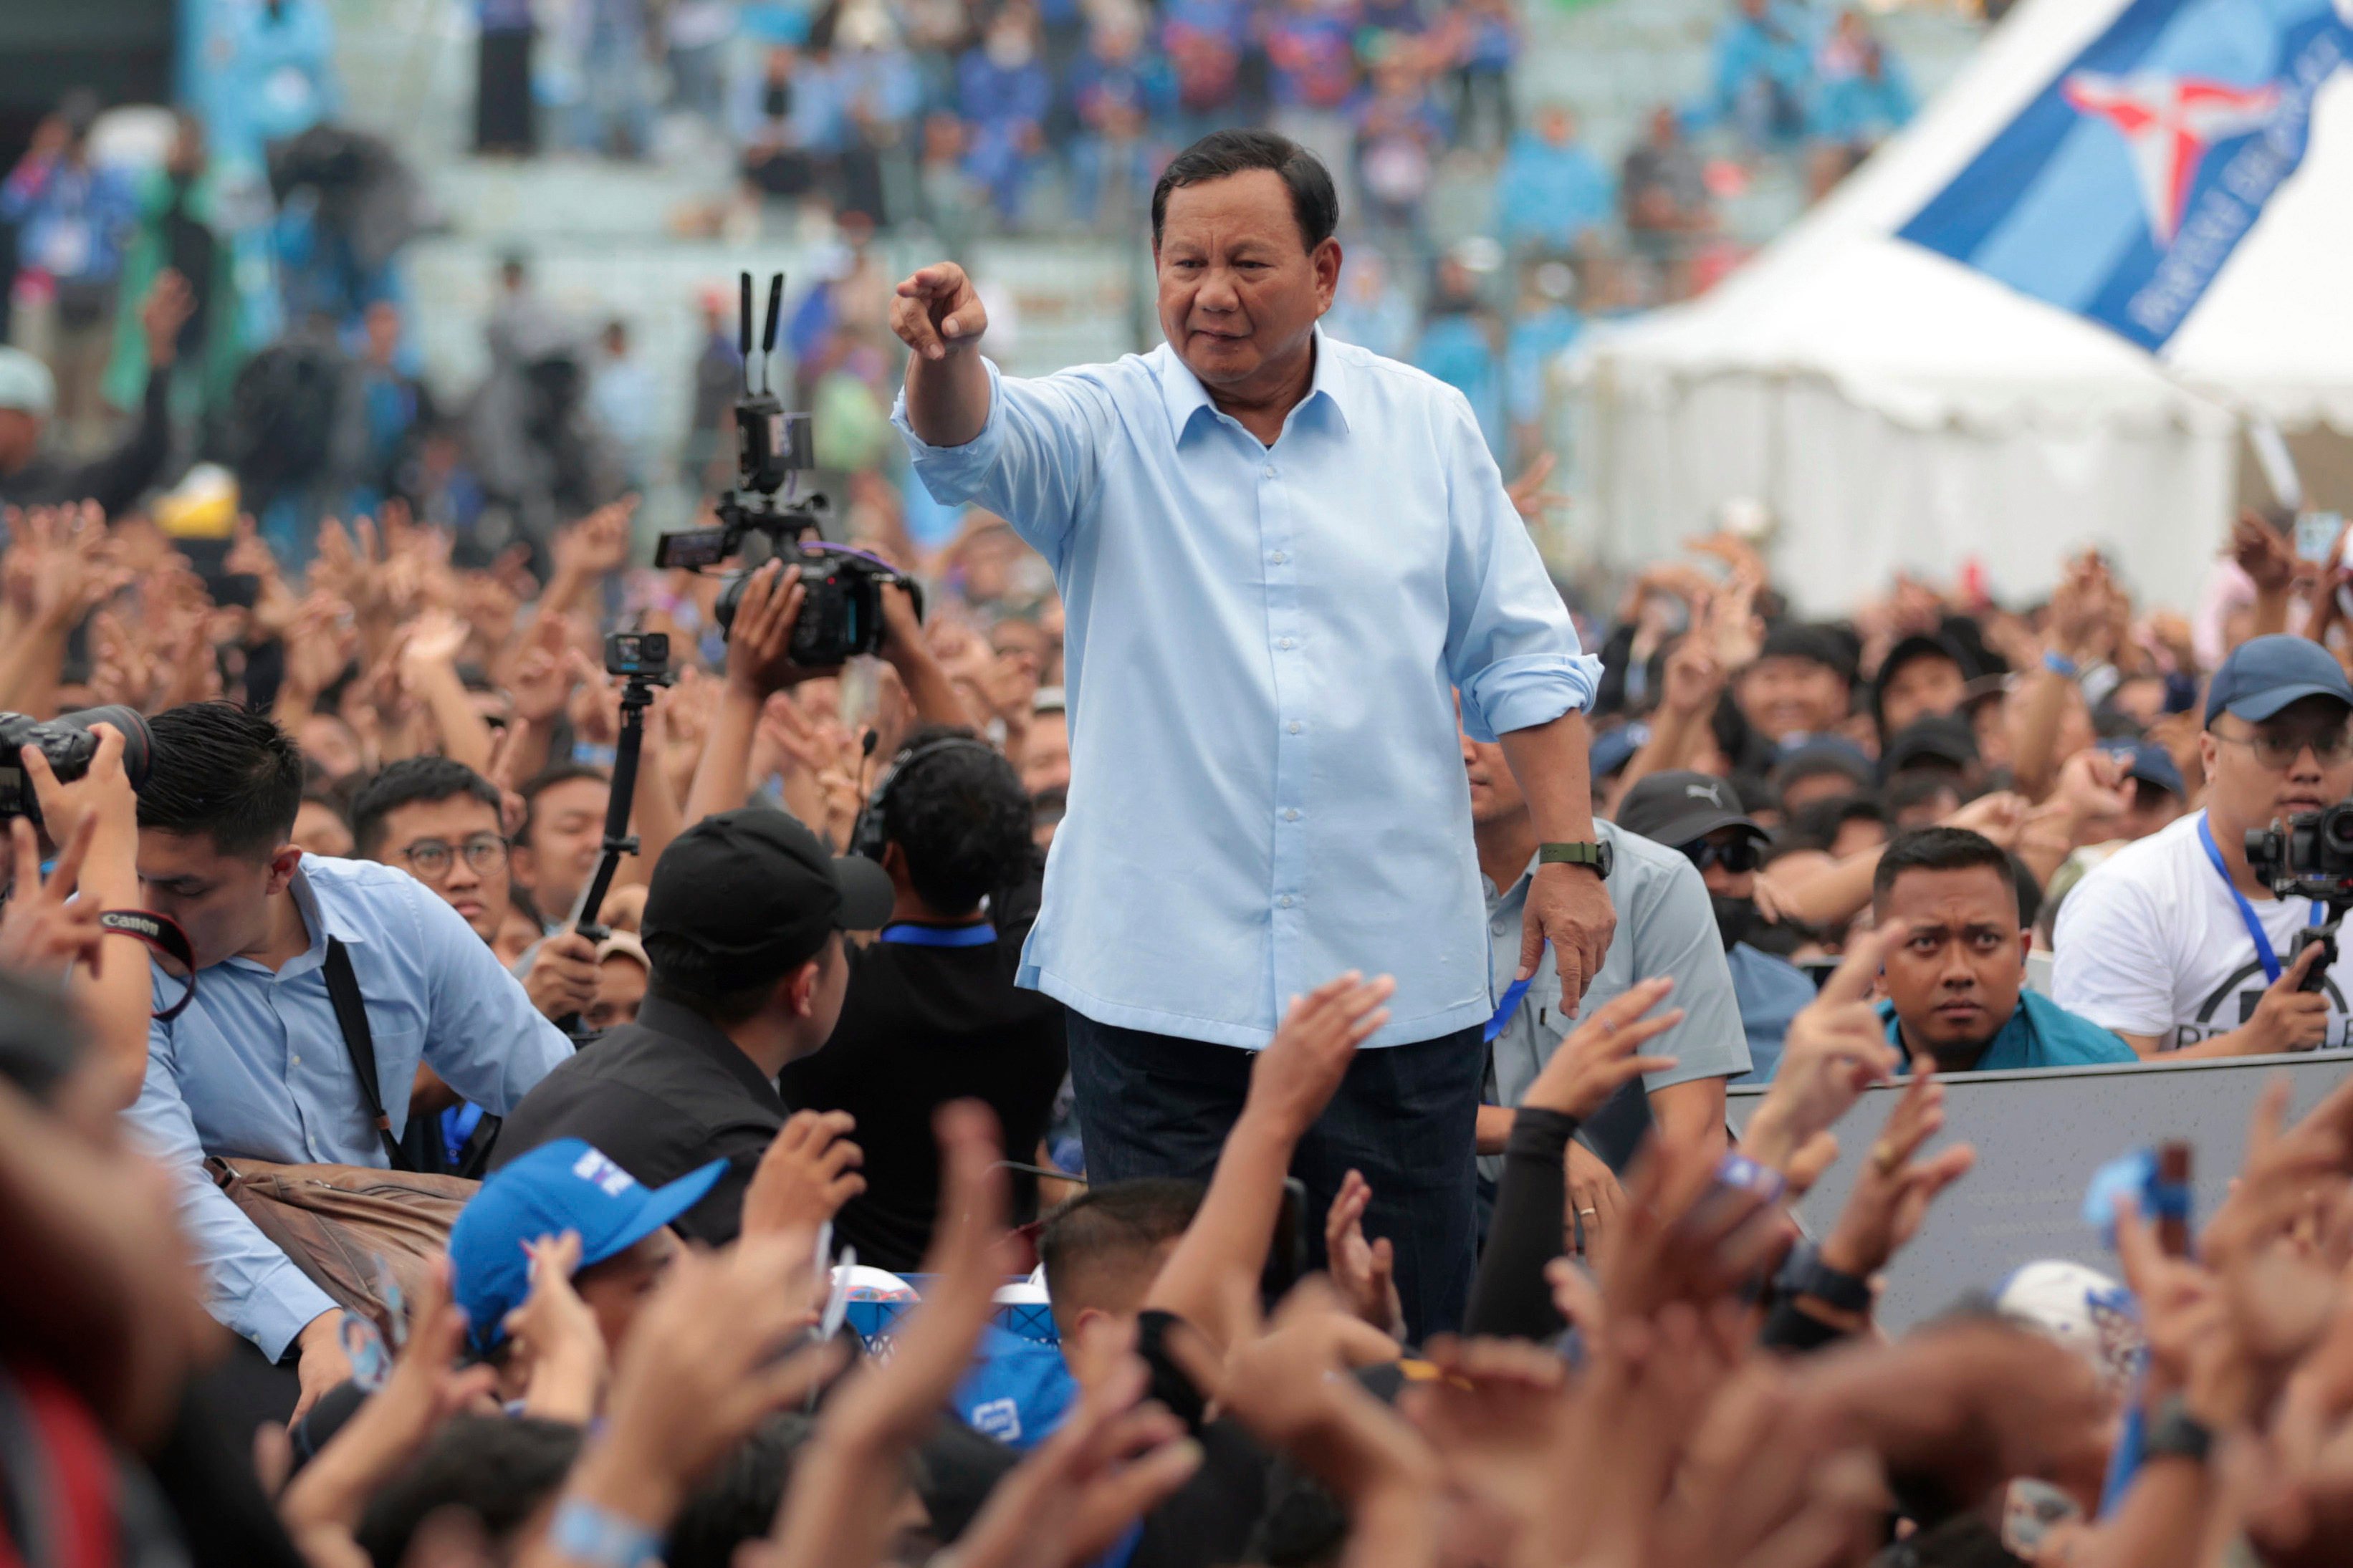 Indonesian presidential candidate Prabowo Subianto greets supporters during a campaign rally in Malang, East Java, earlier this month. Photo: AP